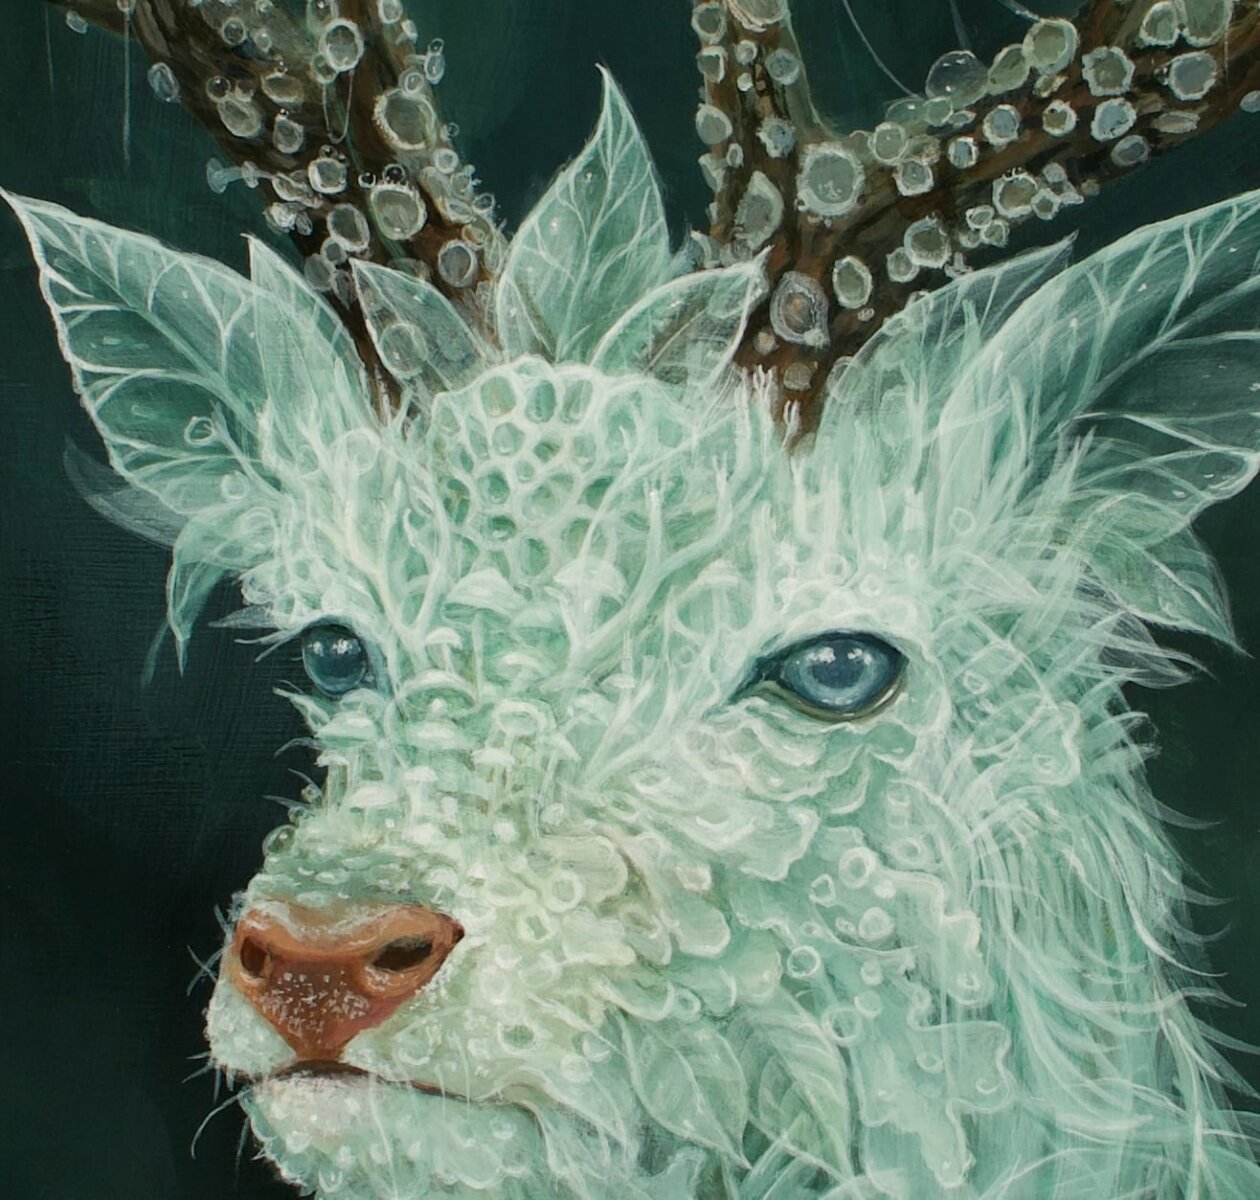 Surrealistic Portrait Paintings Of Animals Composed Of Translucent Botanics By Molly Devlin (6)